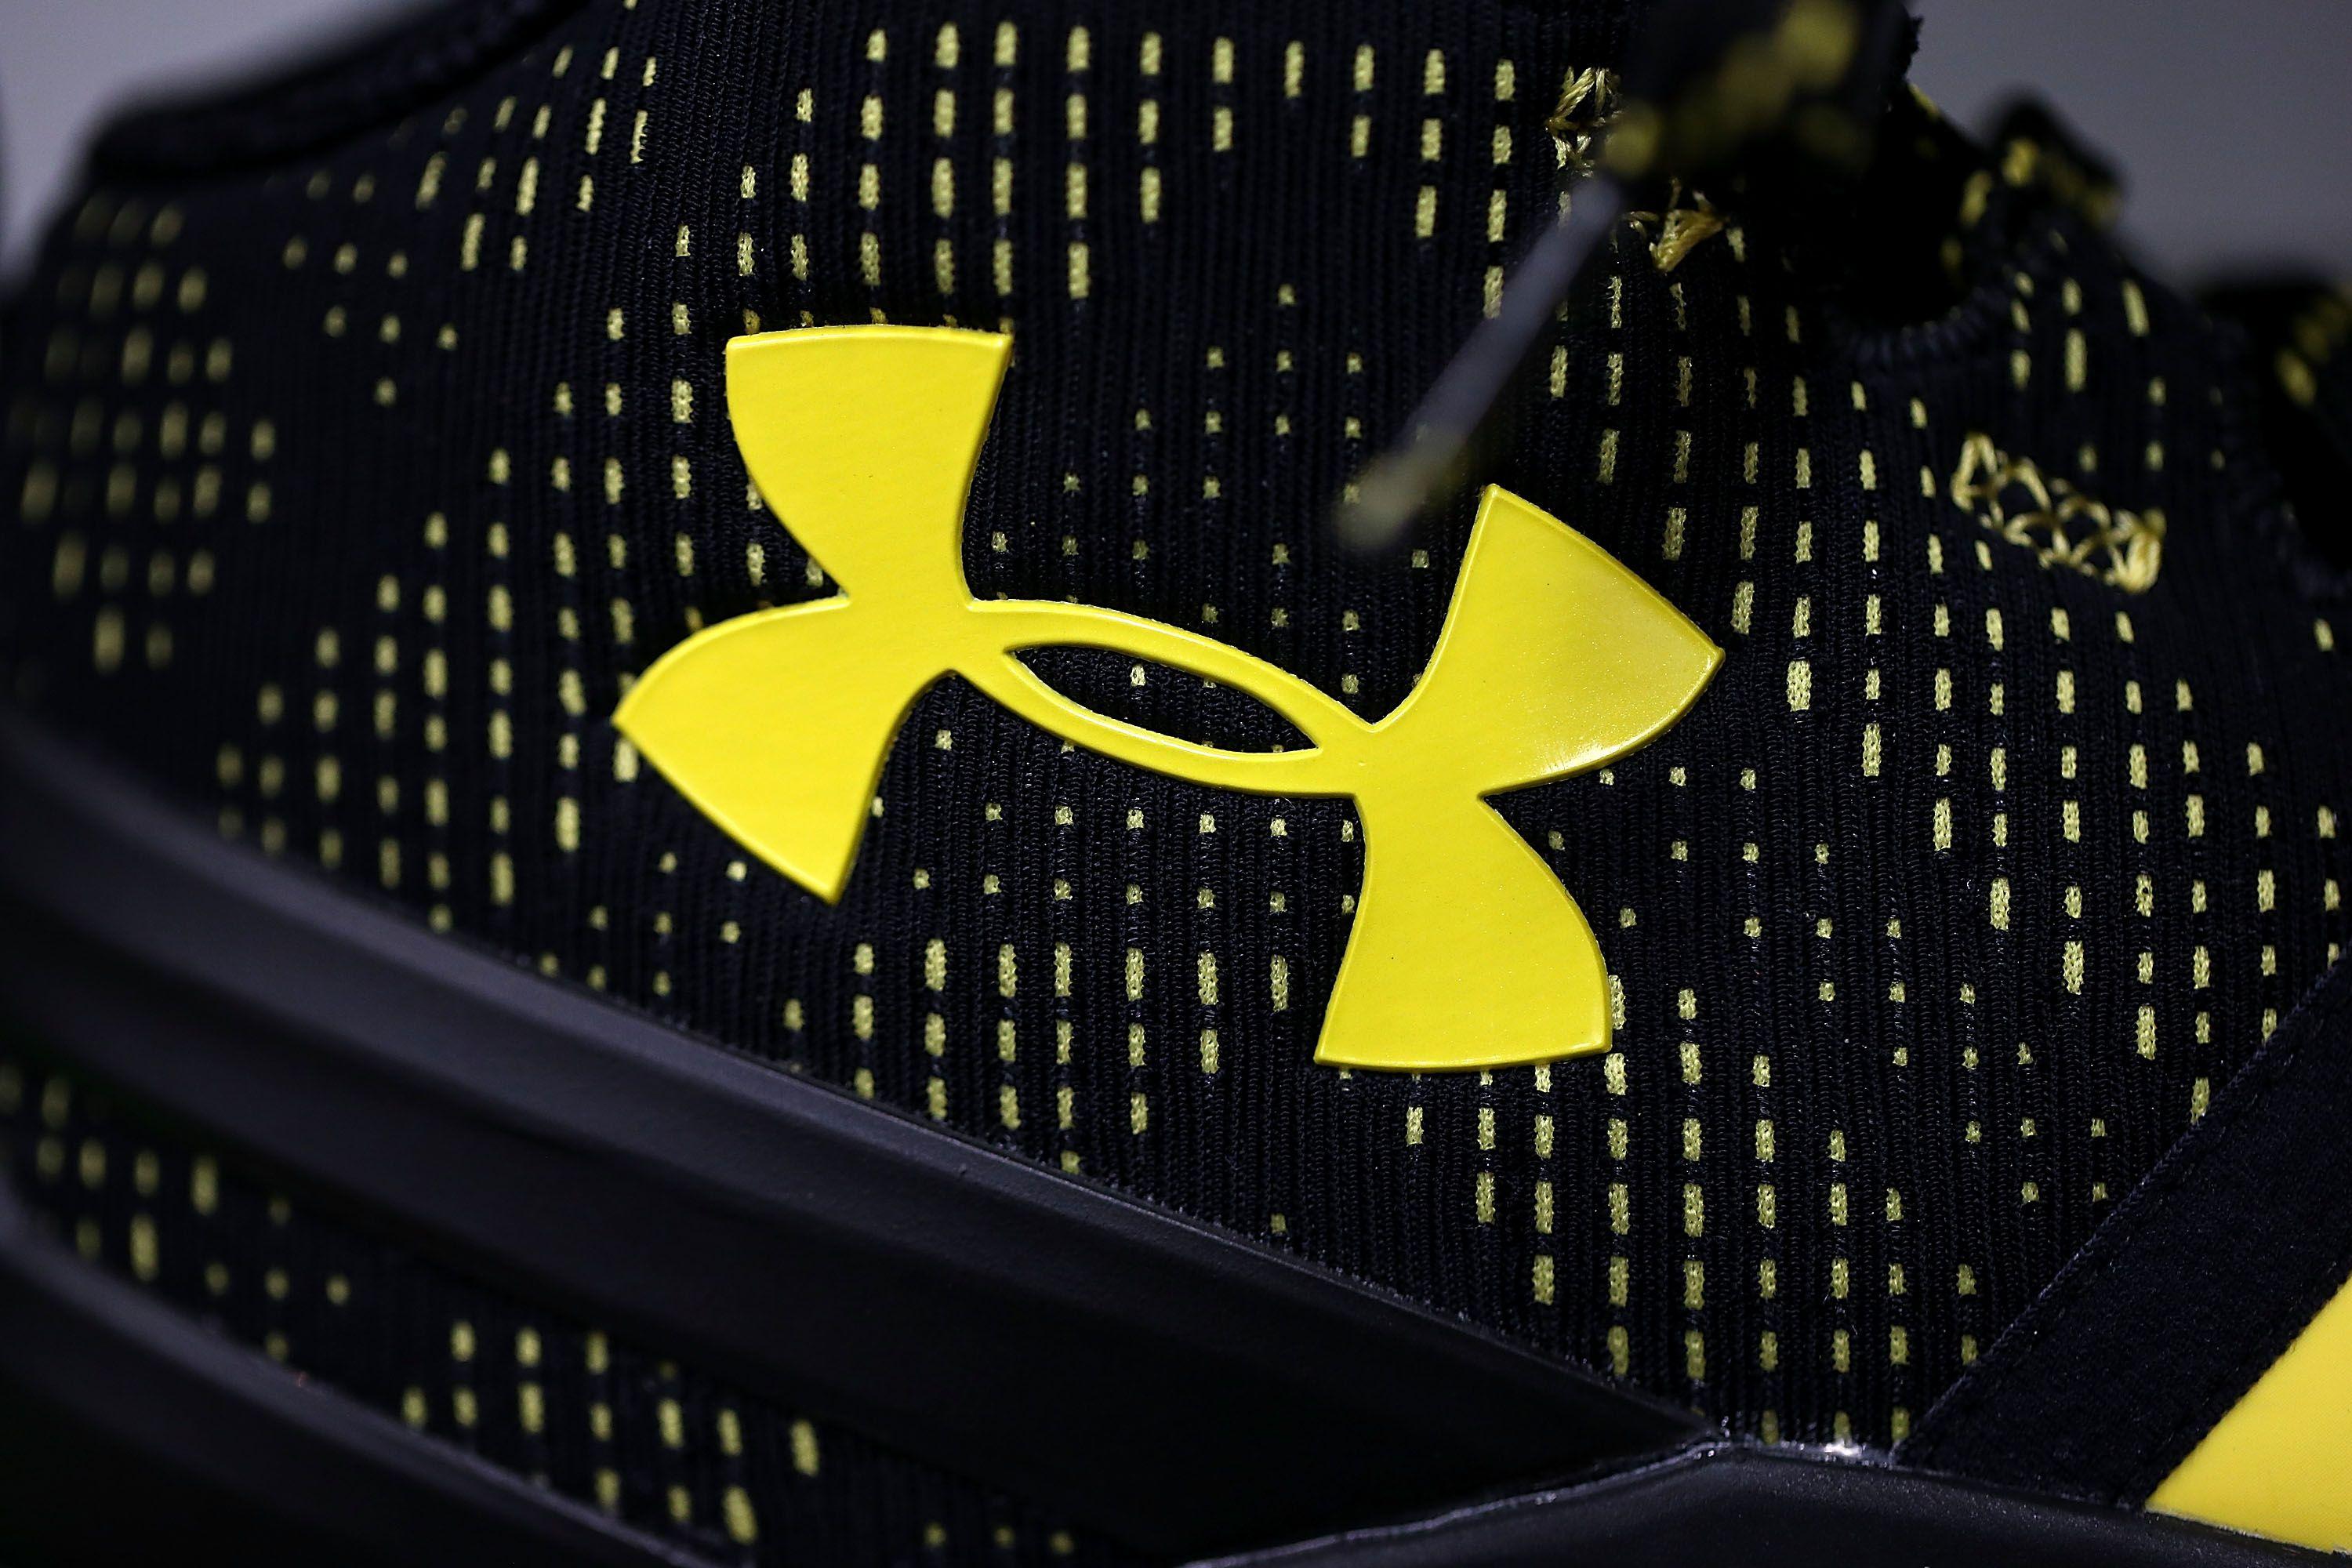 Cool Under Armour Basketball Logo - Under Armour Signs Deal With UC Berkeley, Replacing Nike